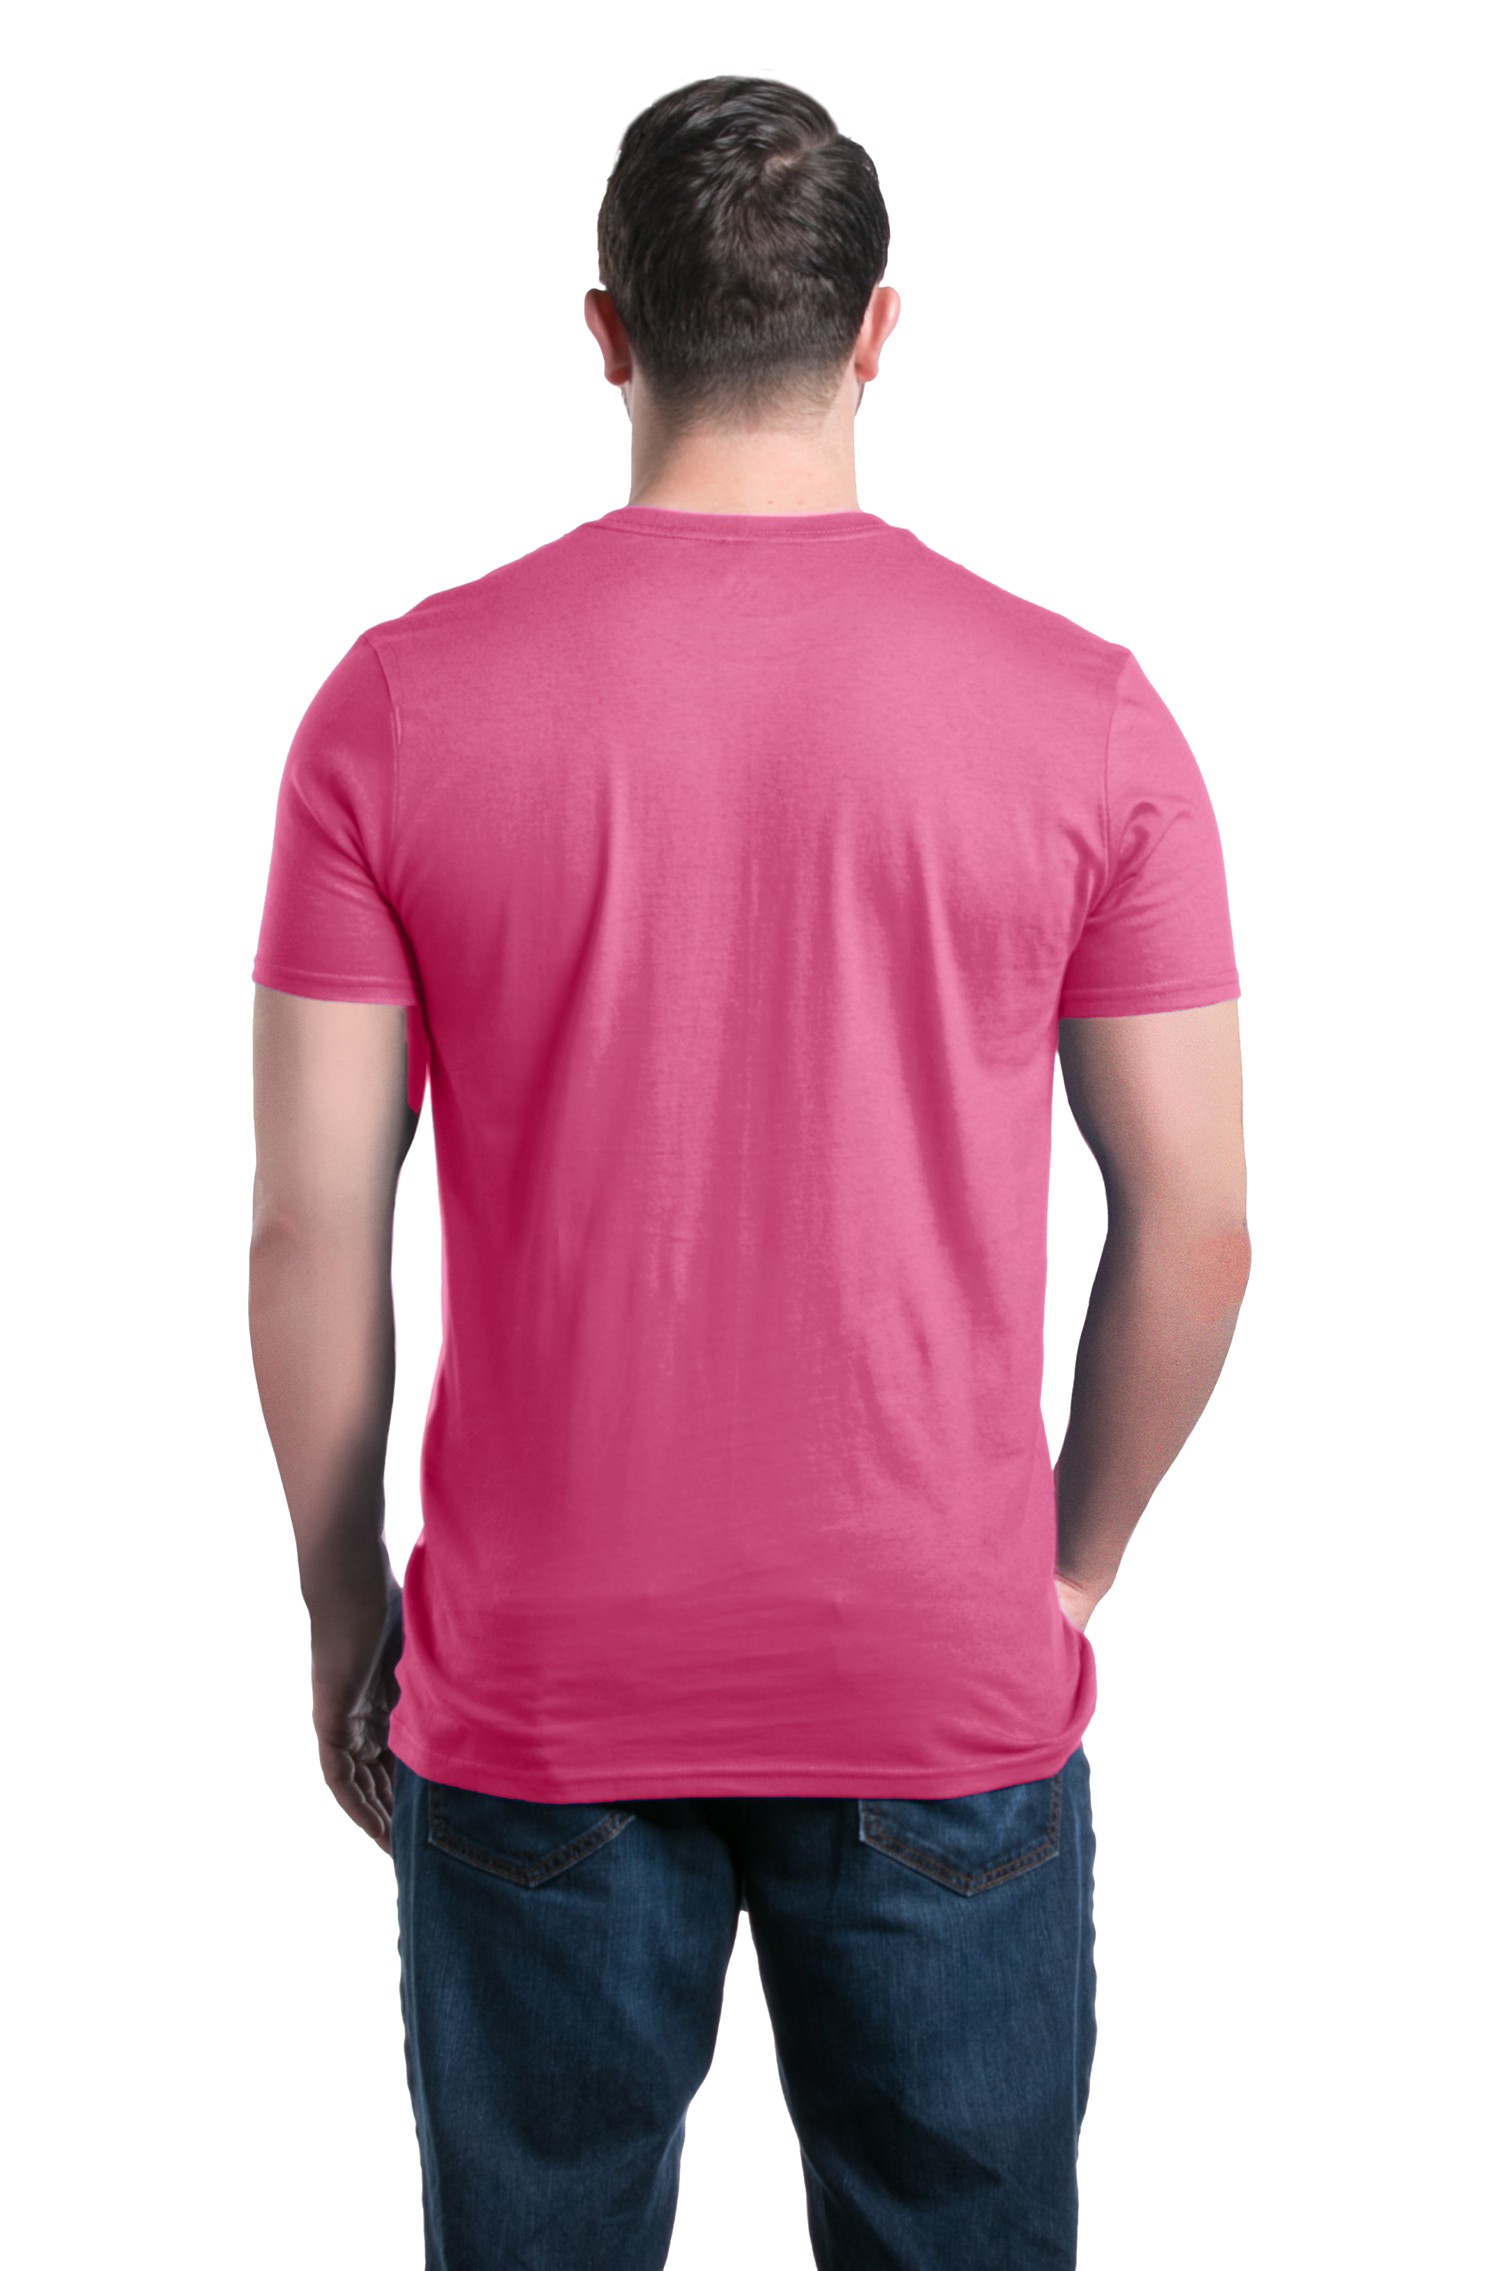 Shop4Ever Men's Anchored in Hope Breast Cancer Awareness Graphic T-shirt